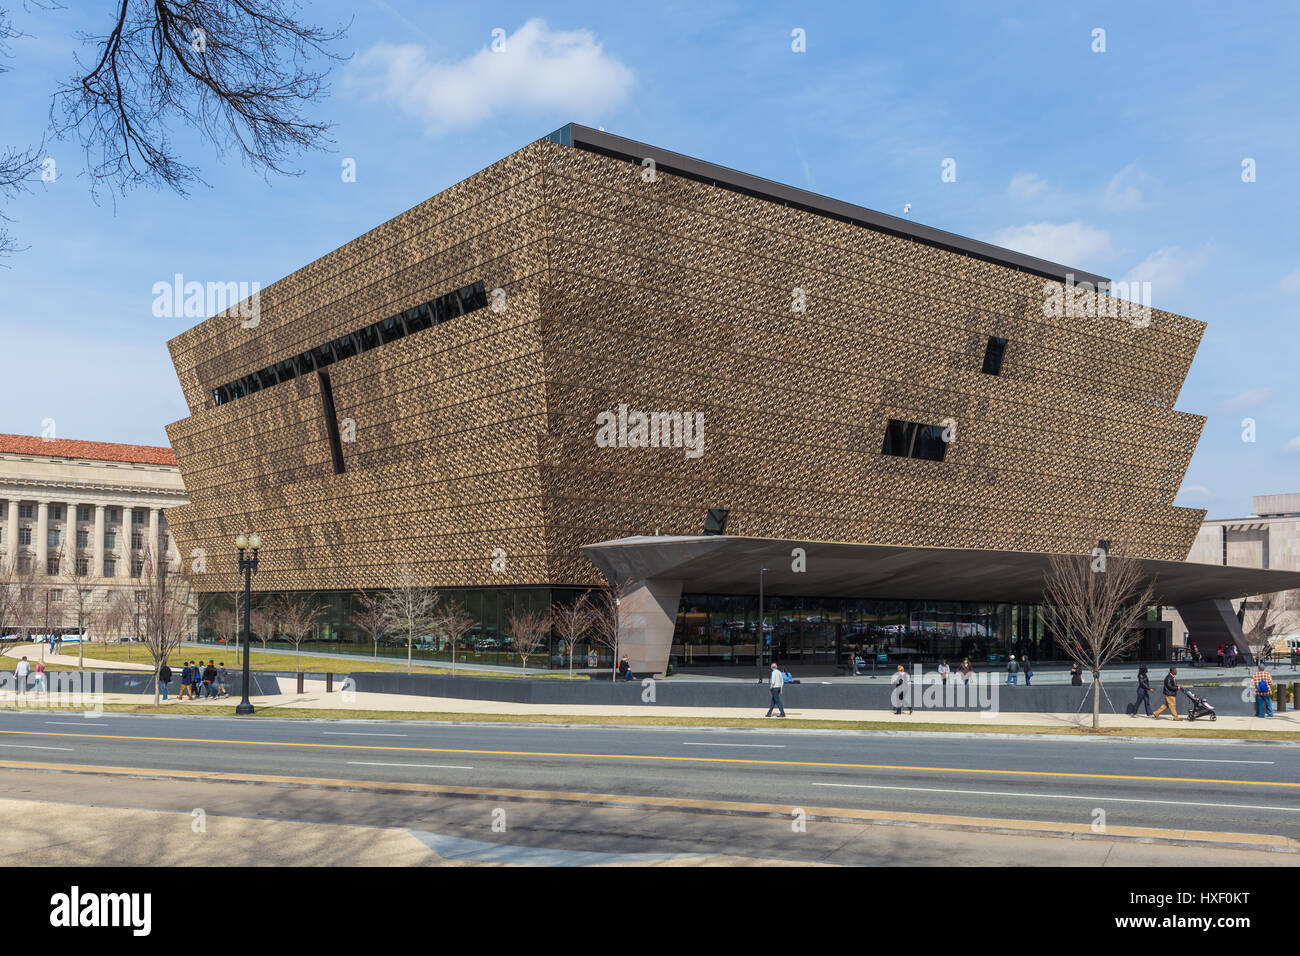 Le Smithsonian National Museum of African American History and Culture (NMAAHC) à Washington, DC. Banque D'Images